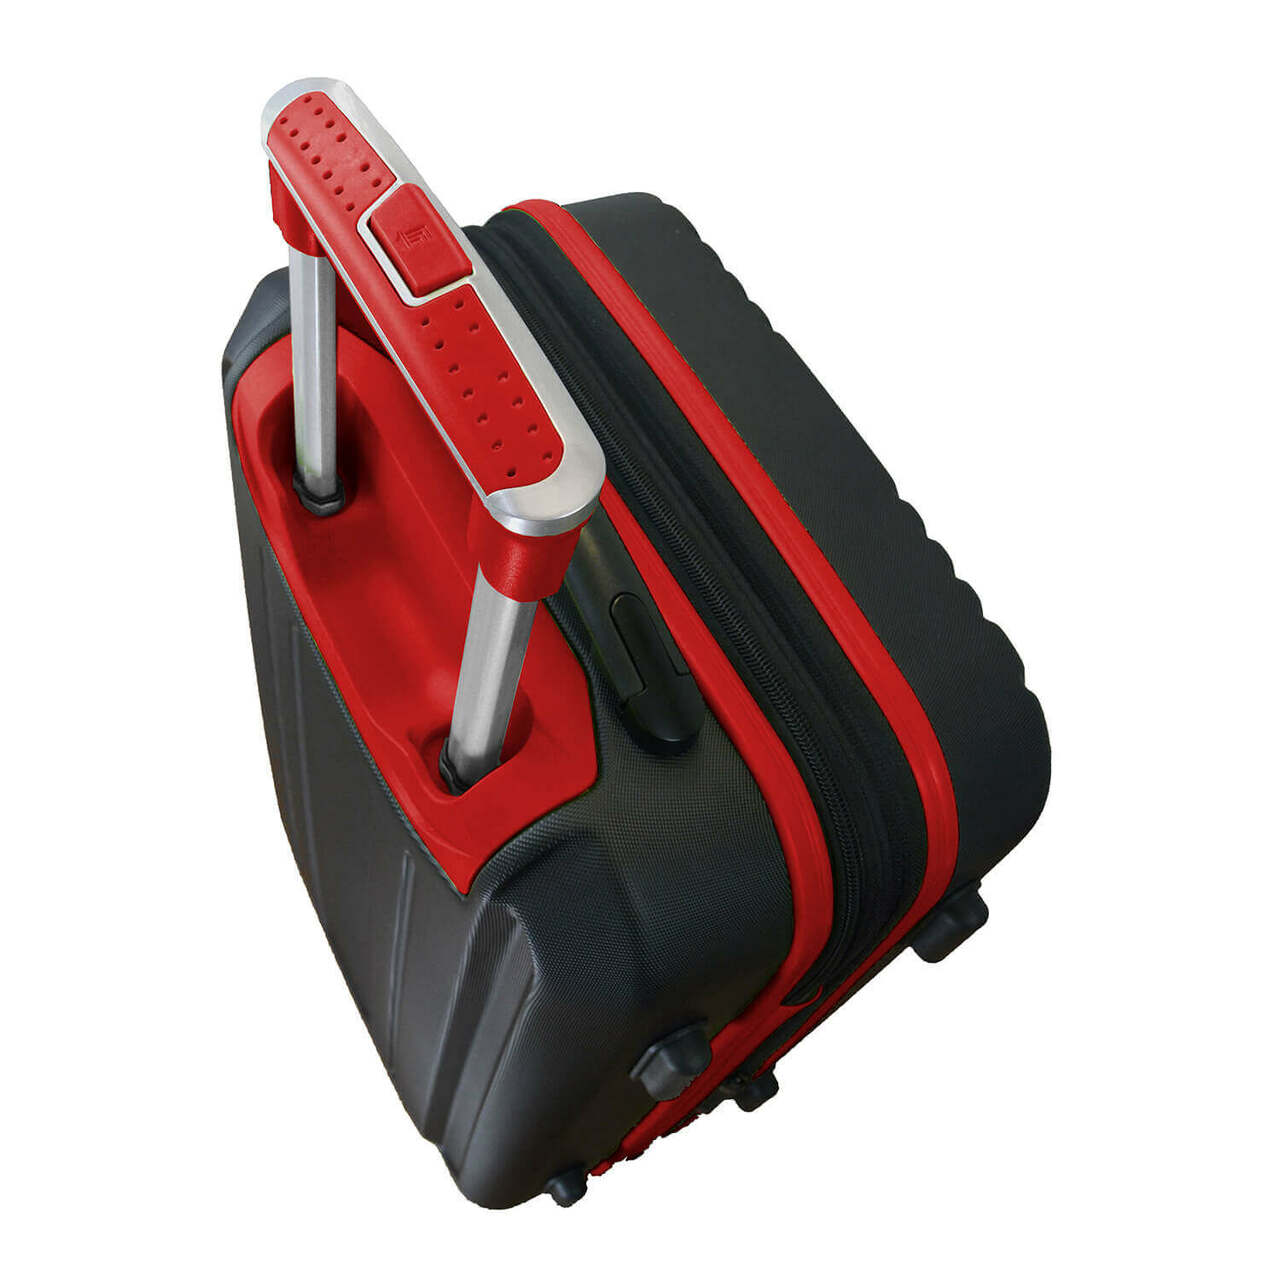 Rangers Carry On Spinner Luggage | Texas Rangers Hardcase Two-Tone Luggage Carry-on Spinner in Red